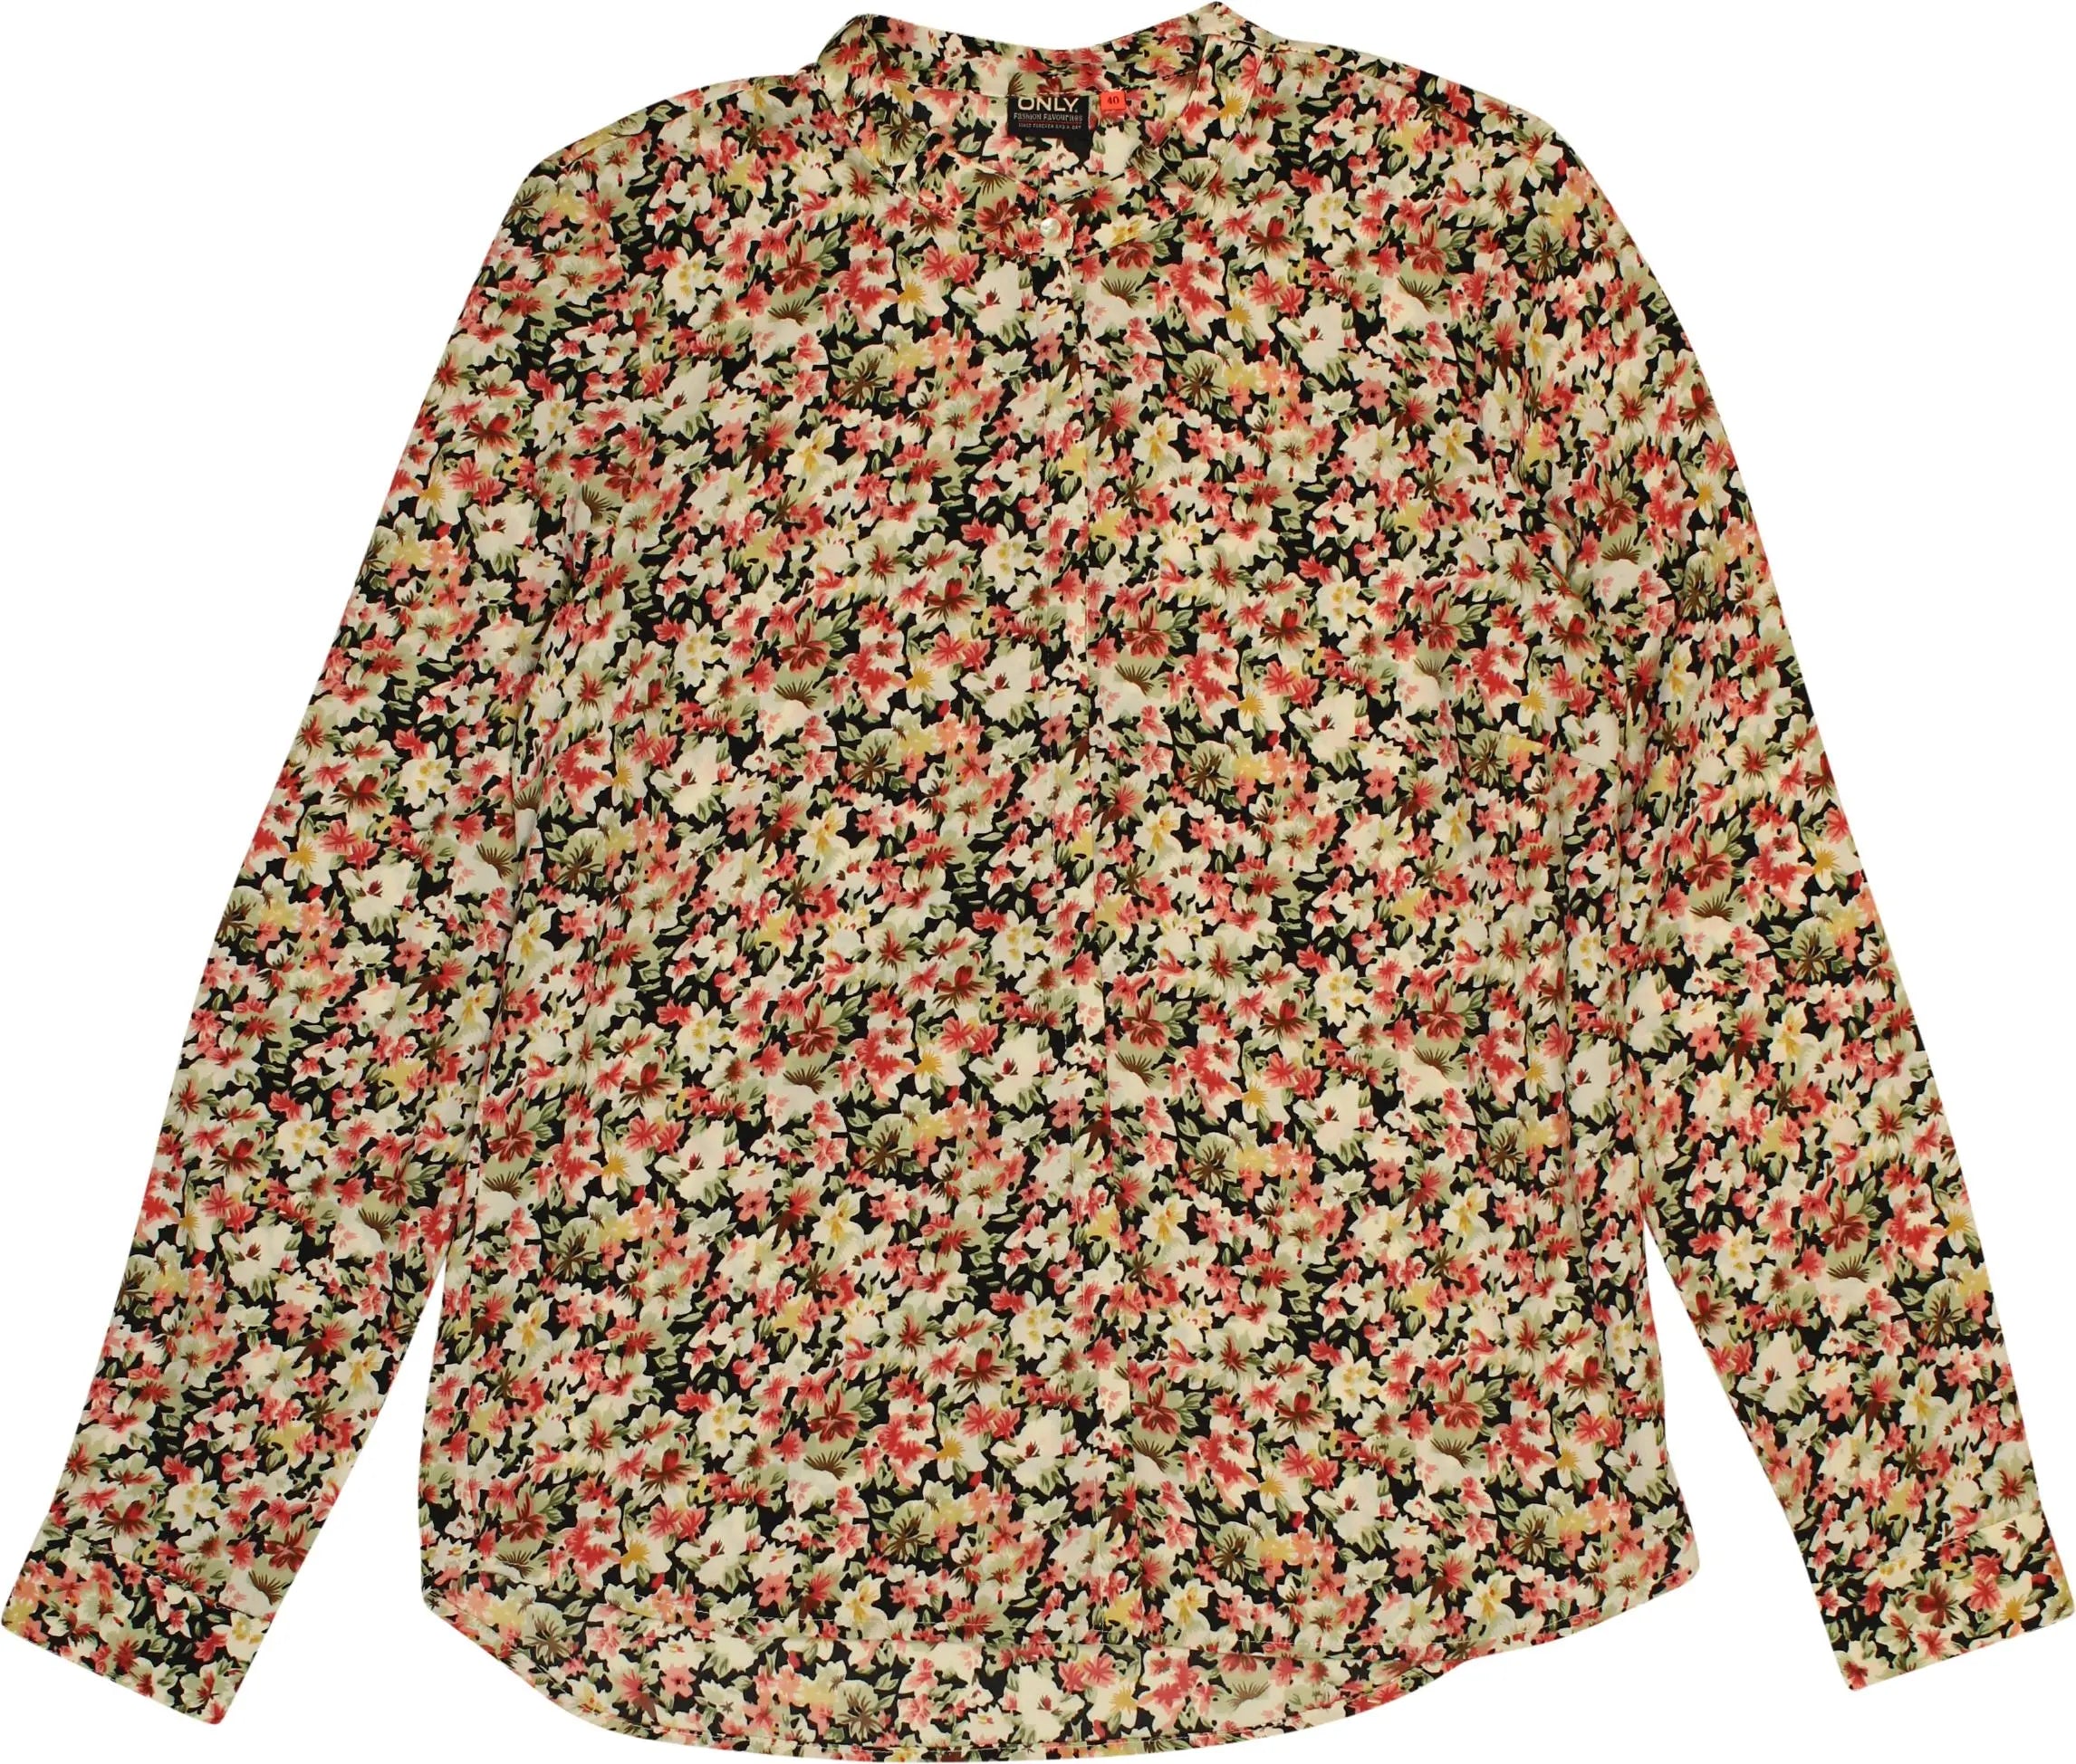 Only - Floral Blouse- ThriftTale.com - Vintage and second handclothing